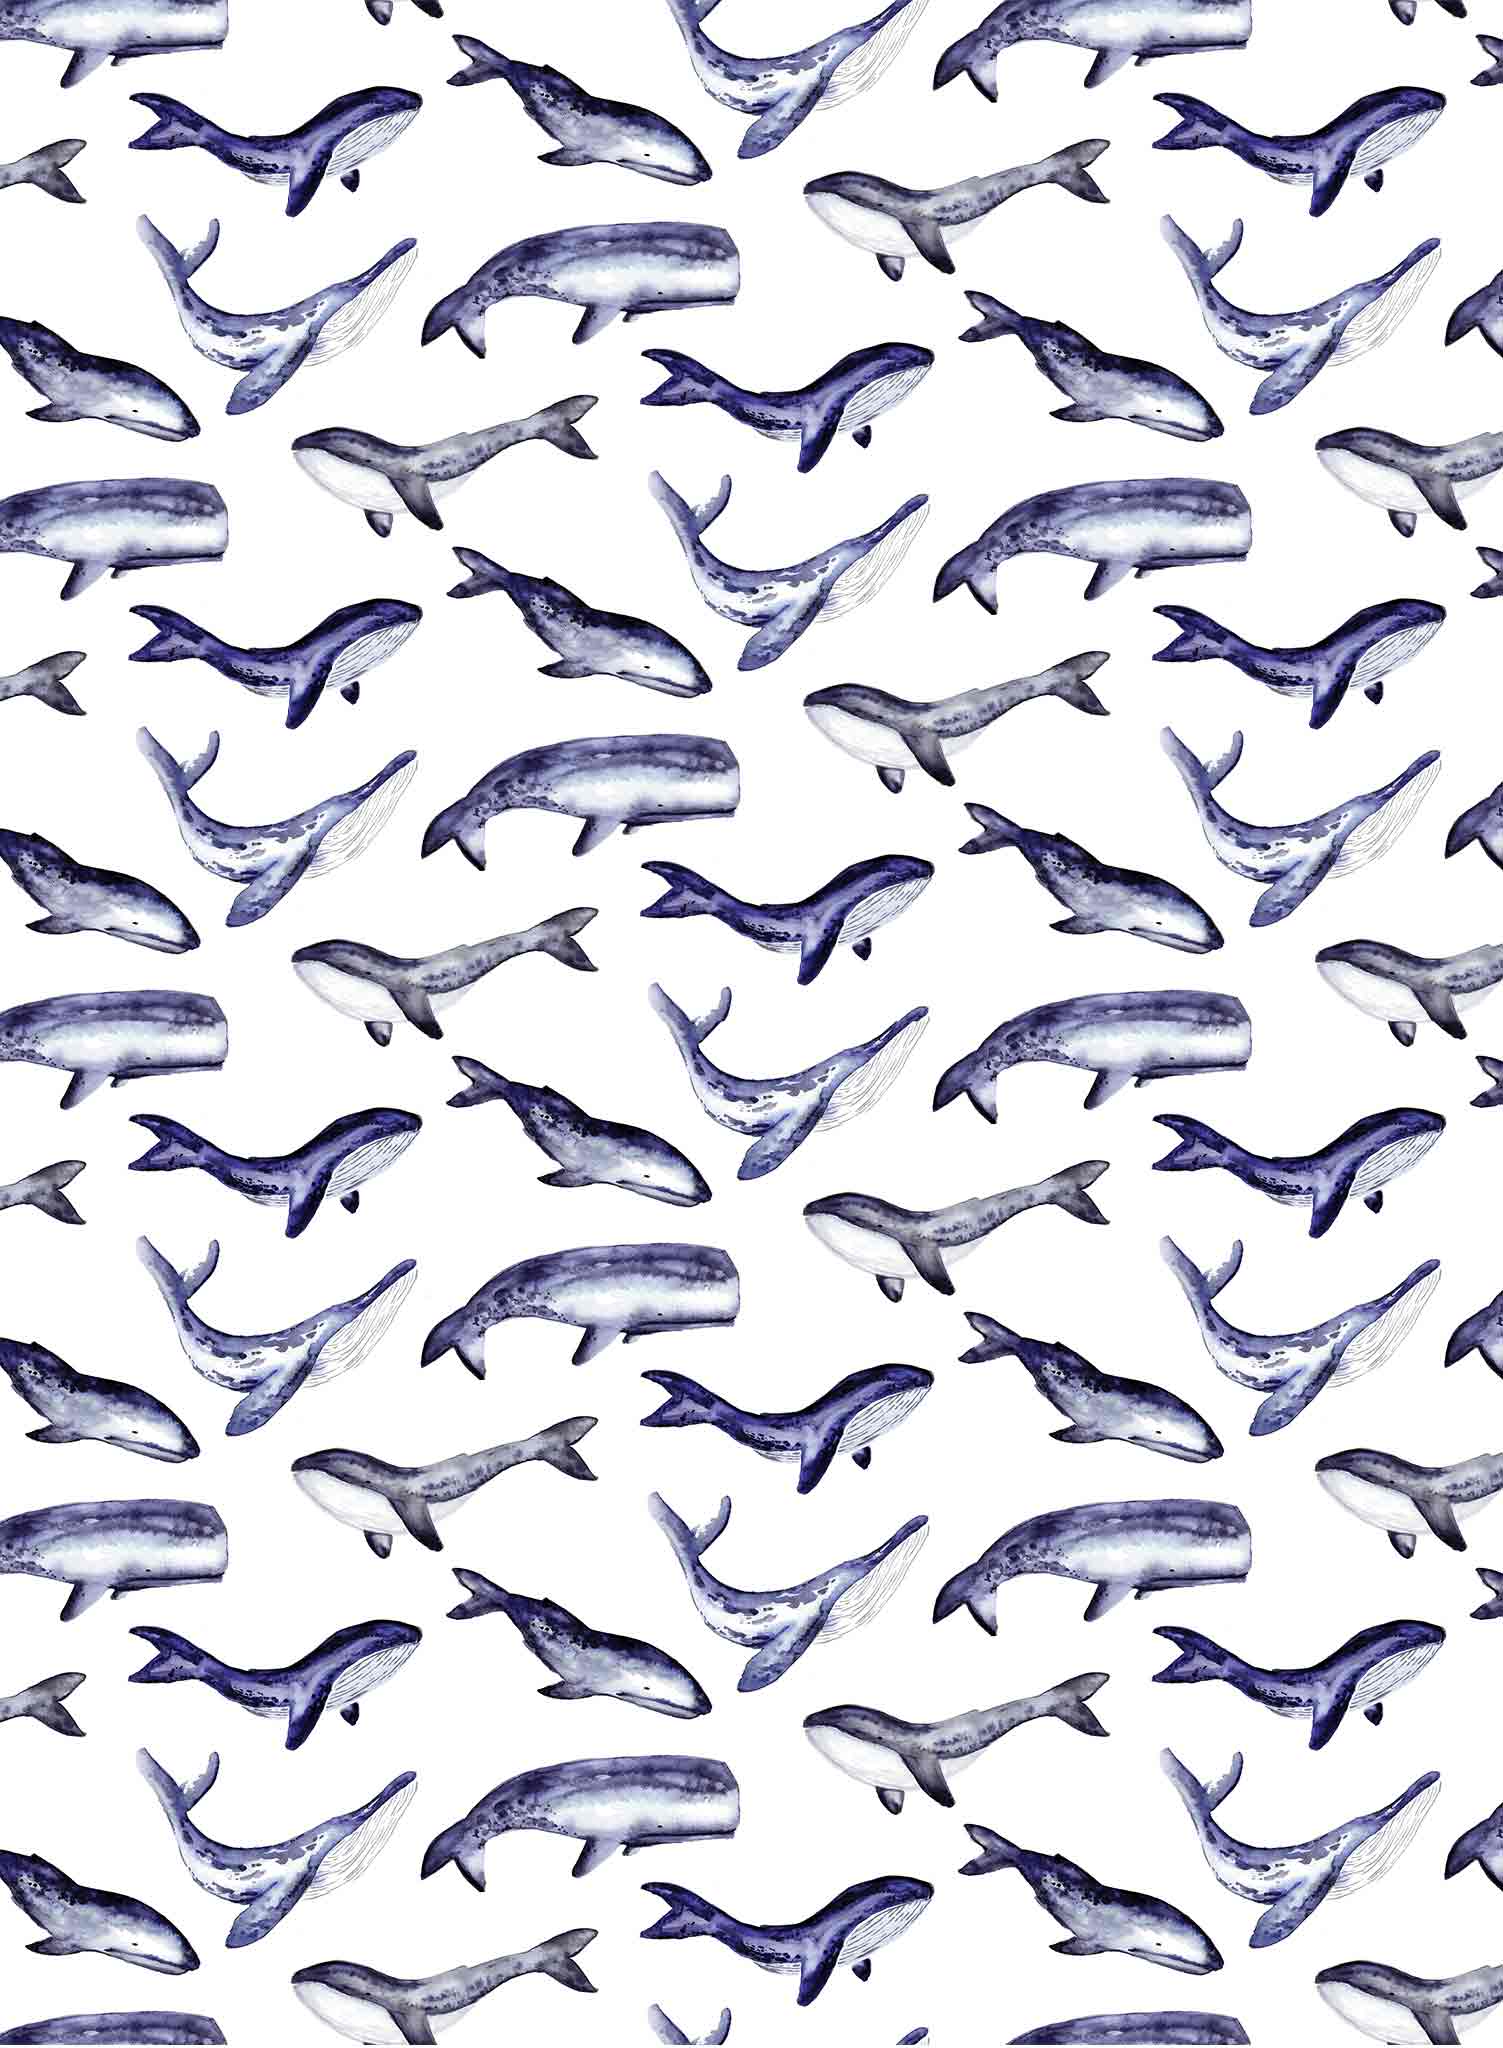 Whale Tale is a minimalist wallpaper by Opposite Wall of a collection of various whale types.